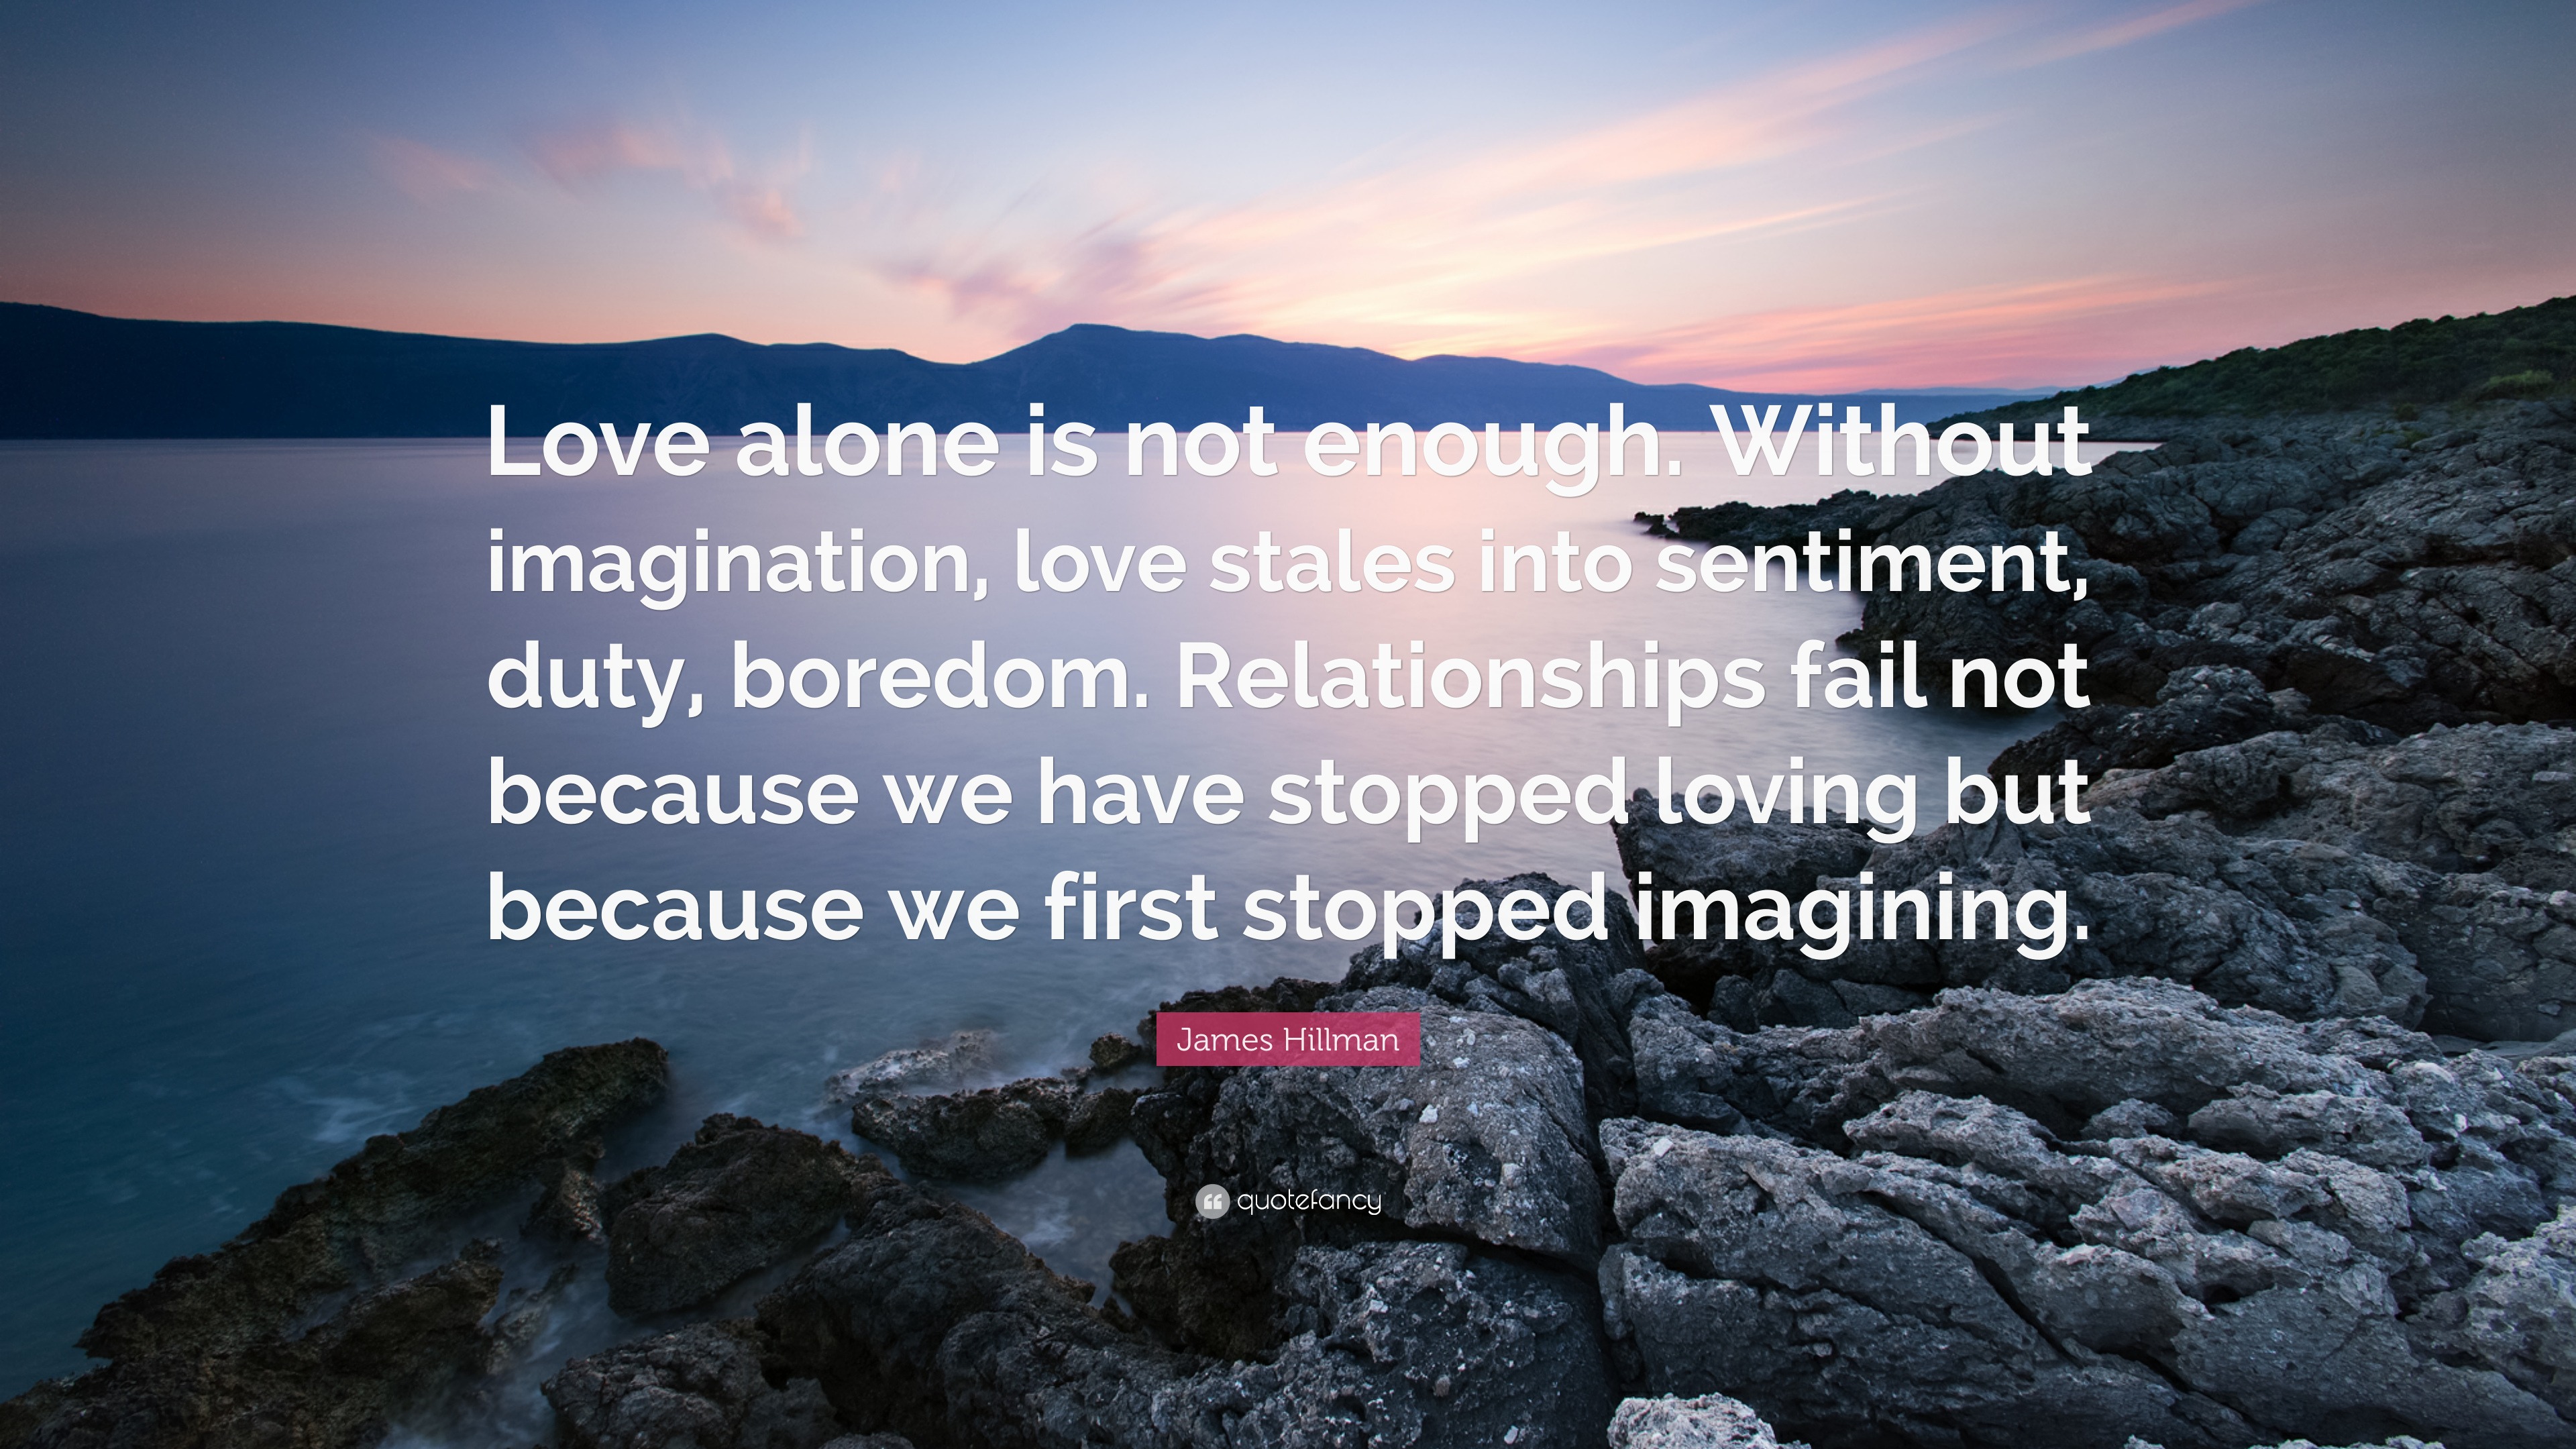 James Hillman Quote “Love alone is not enough. Without